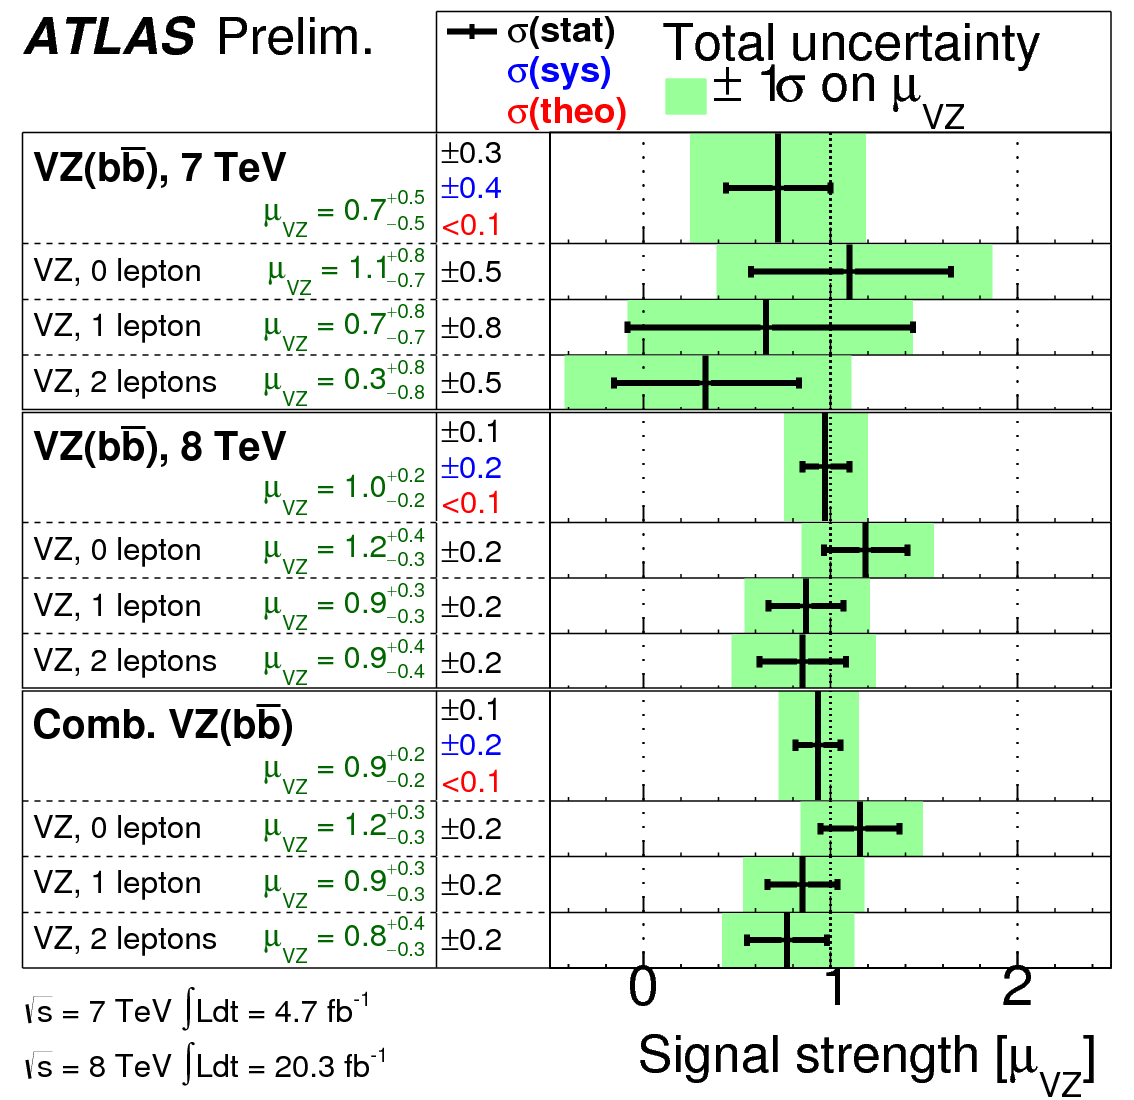 ATLAS: Search for H bb Cross check: Search for VZ production - Fit of W(Z bb)+z(z bb) cross section - V(H bb) as